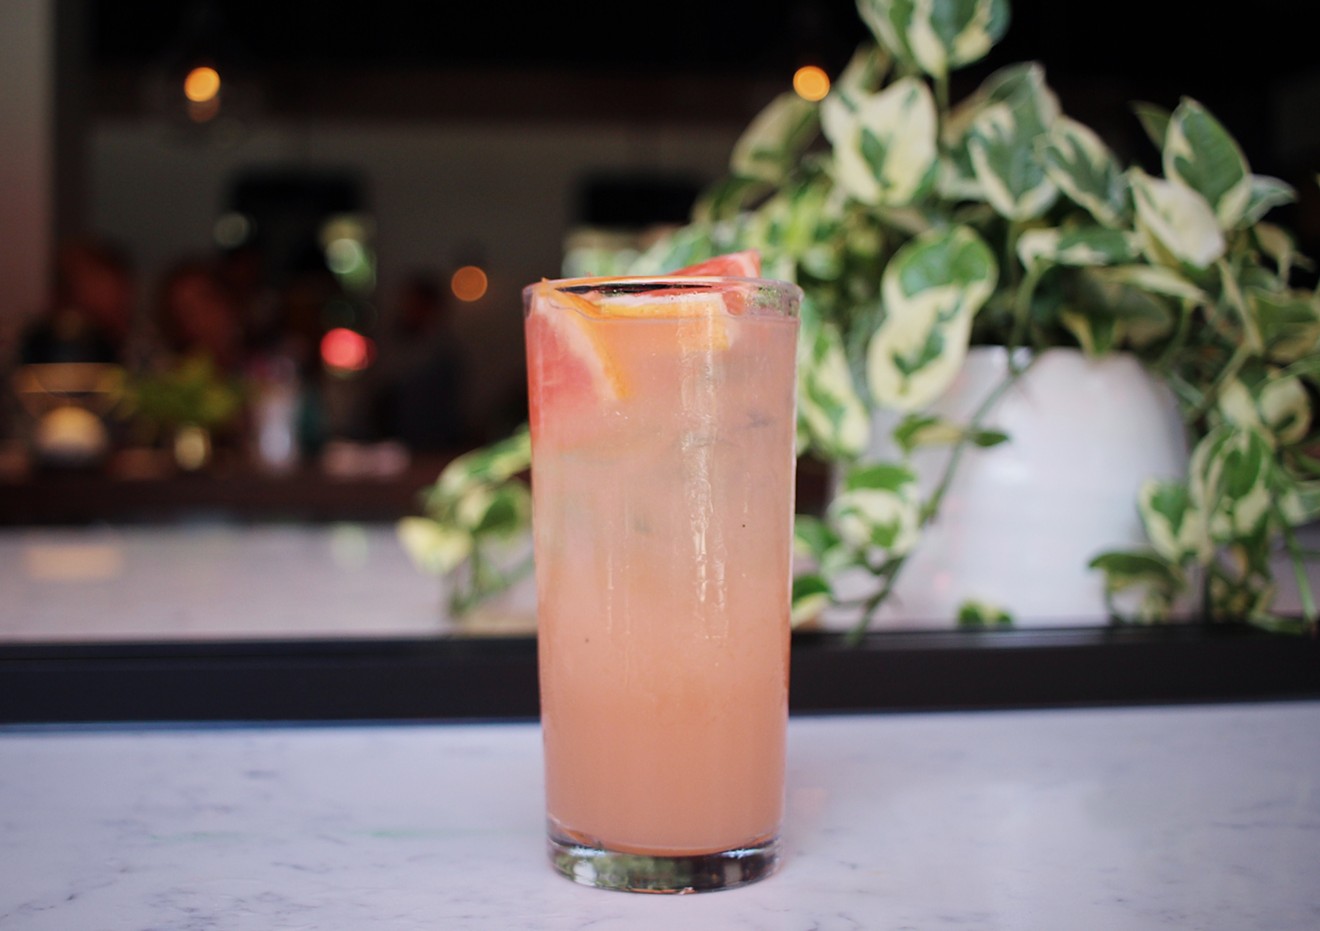 The Vanilla Ginger Greyhound will have you off to the races in no time.